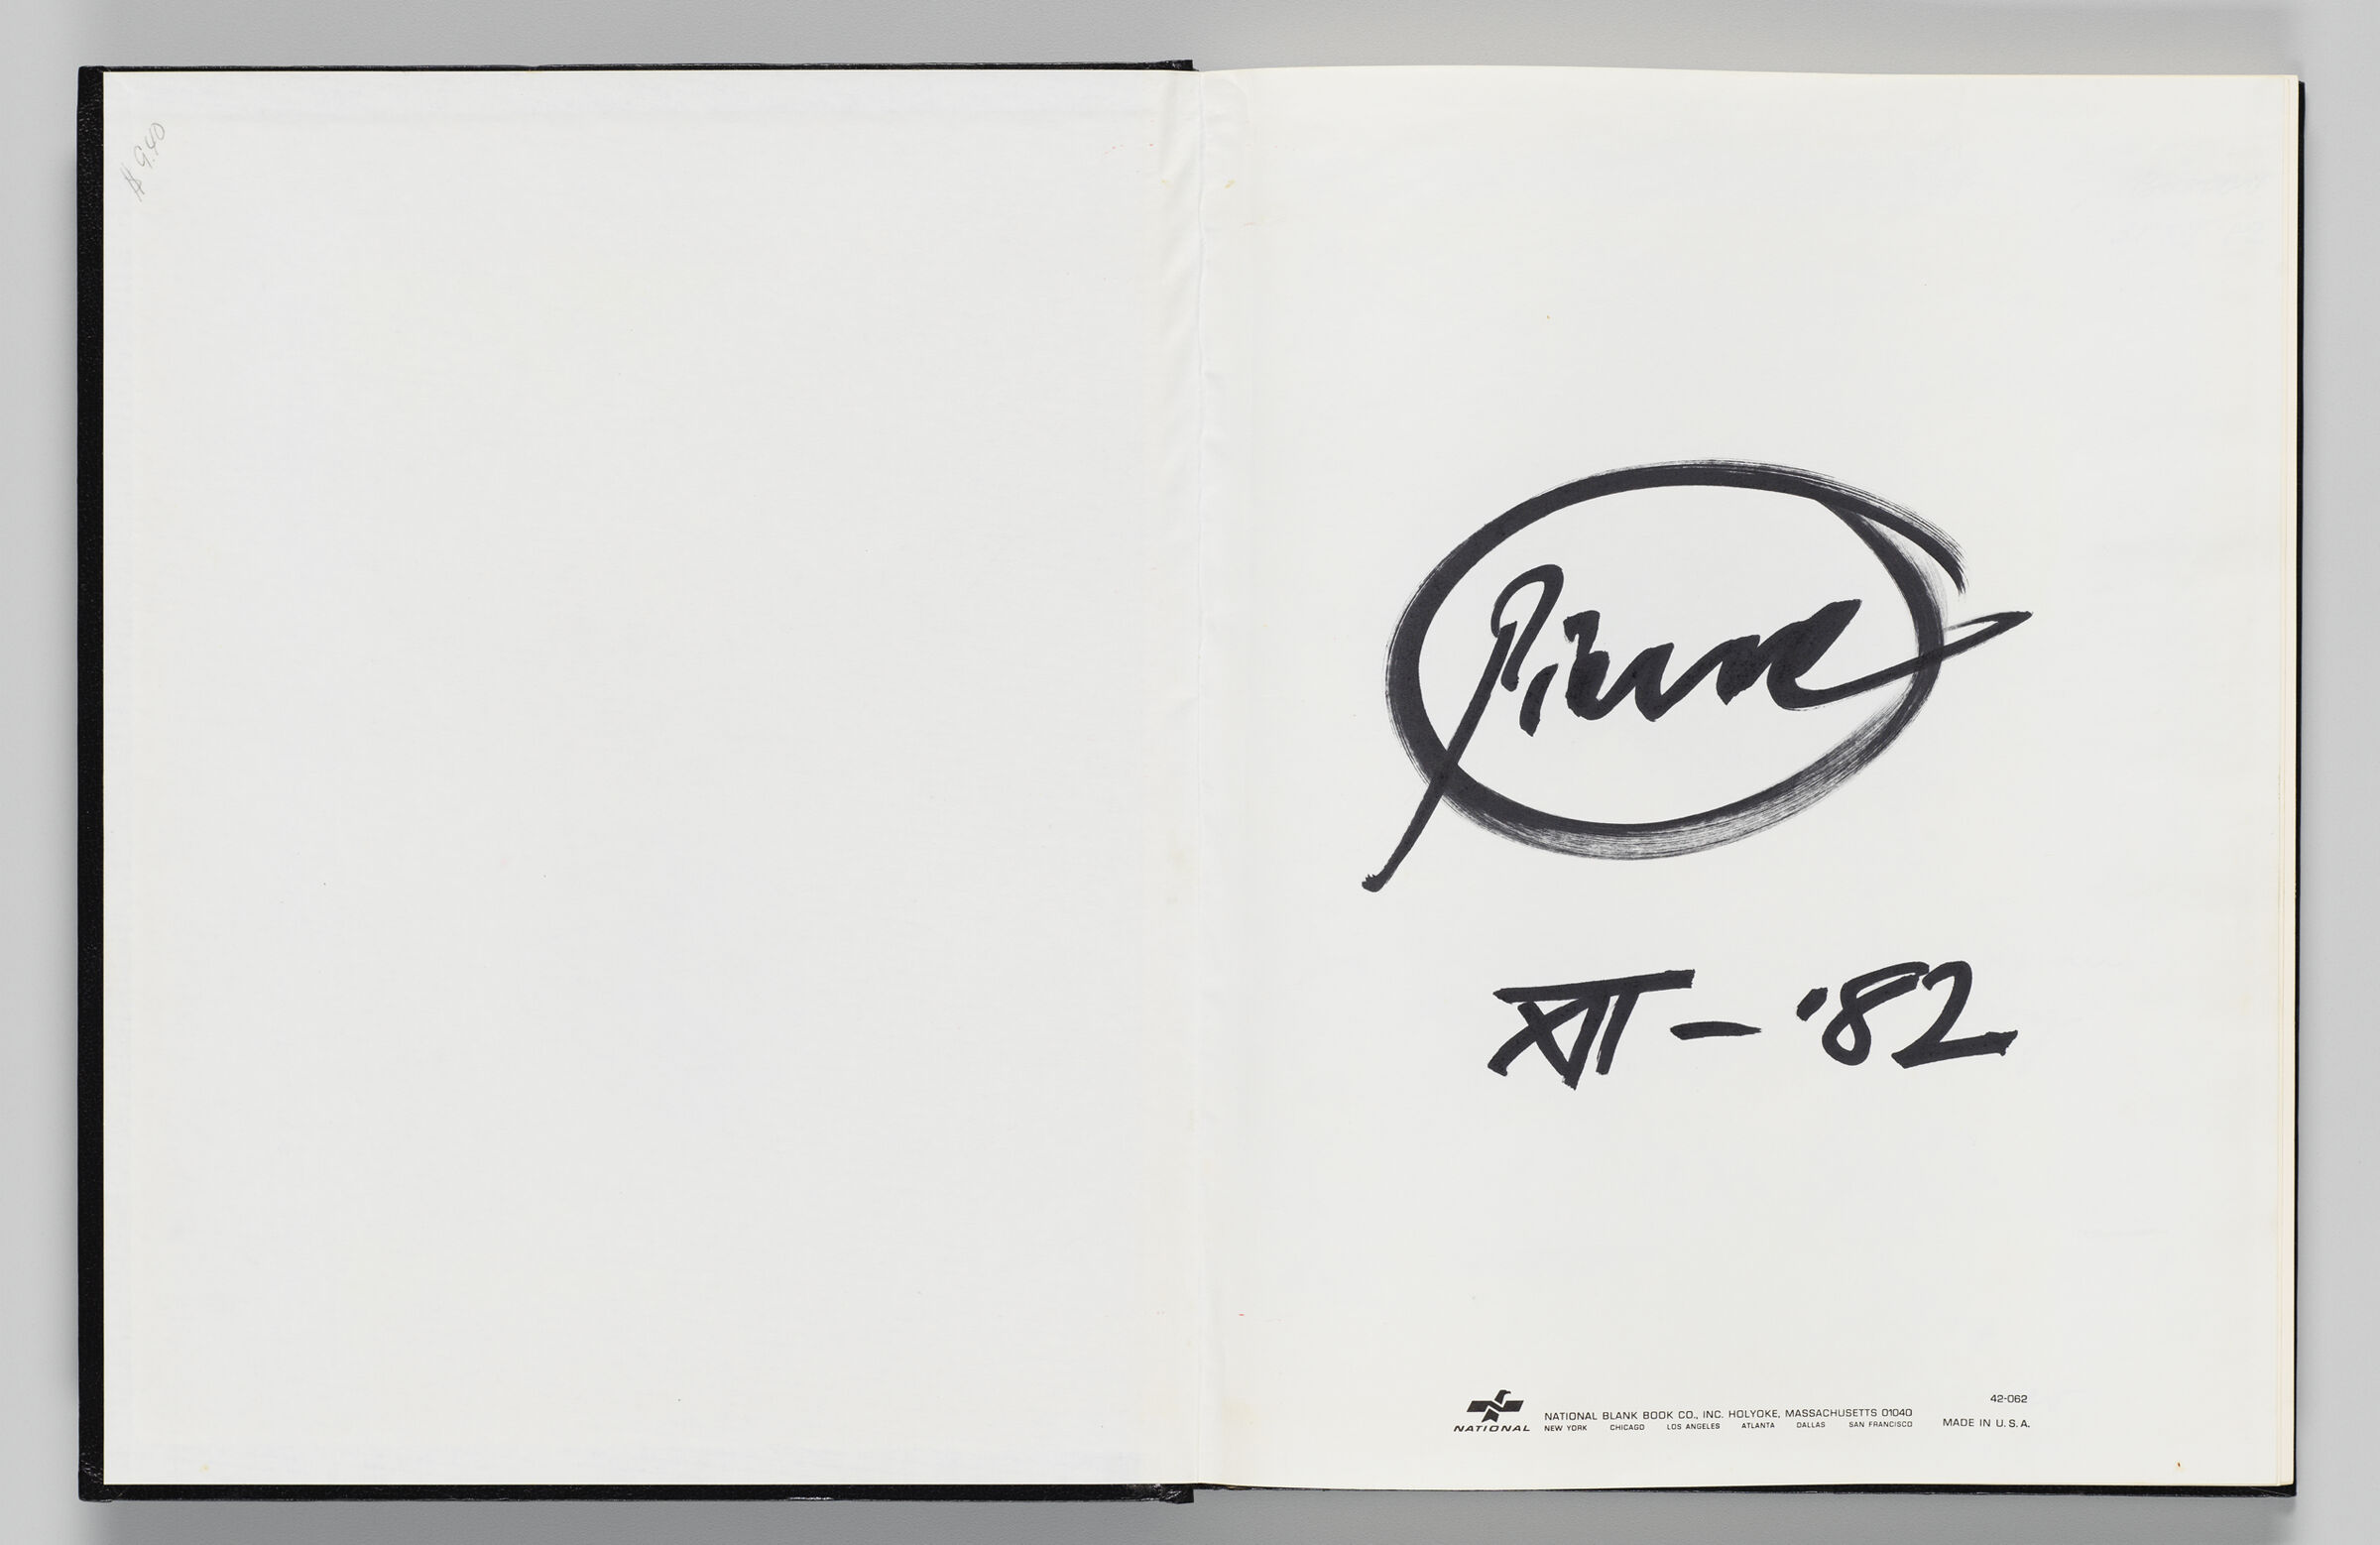 Untitled (Front Endpaper, Left Page); Untitled (Signature, Right Page)